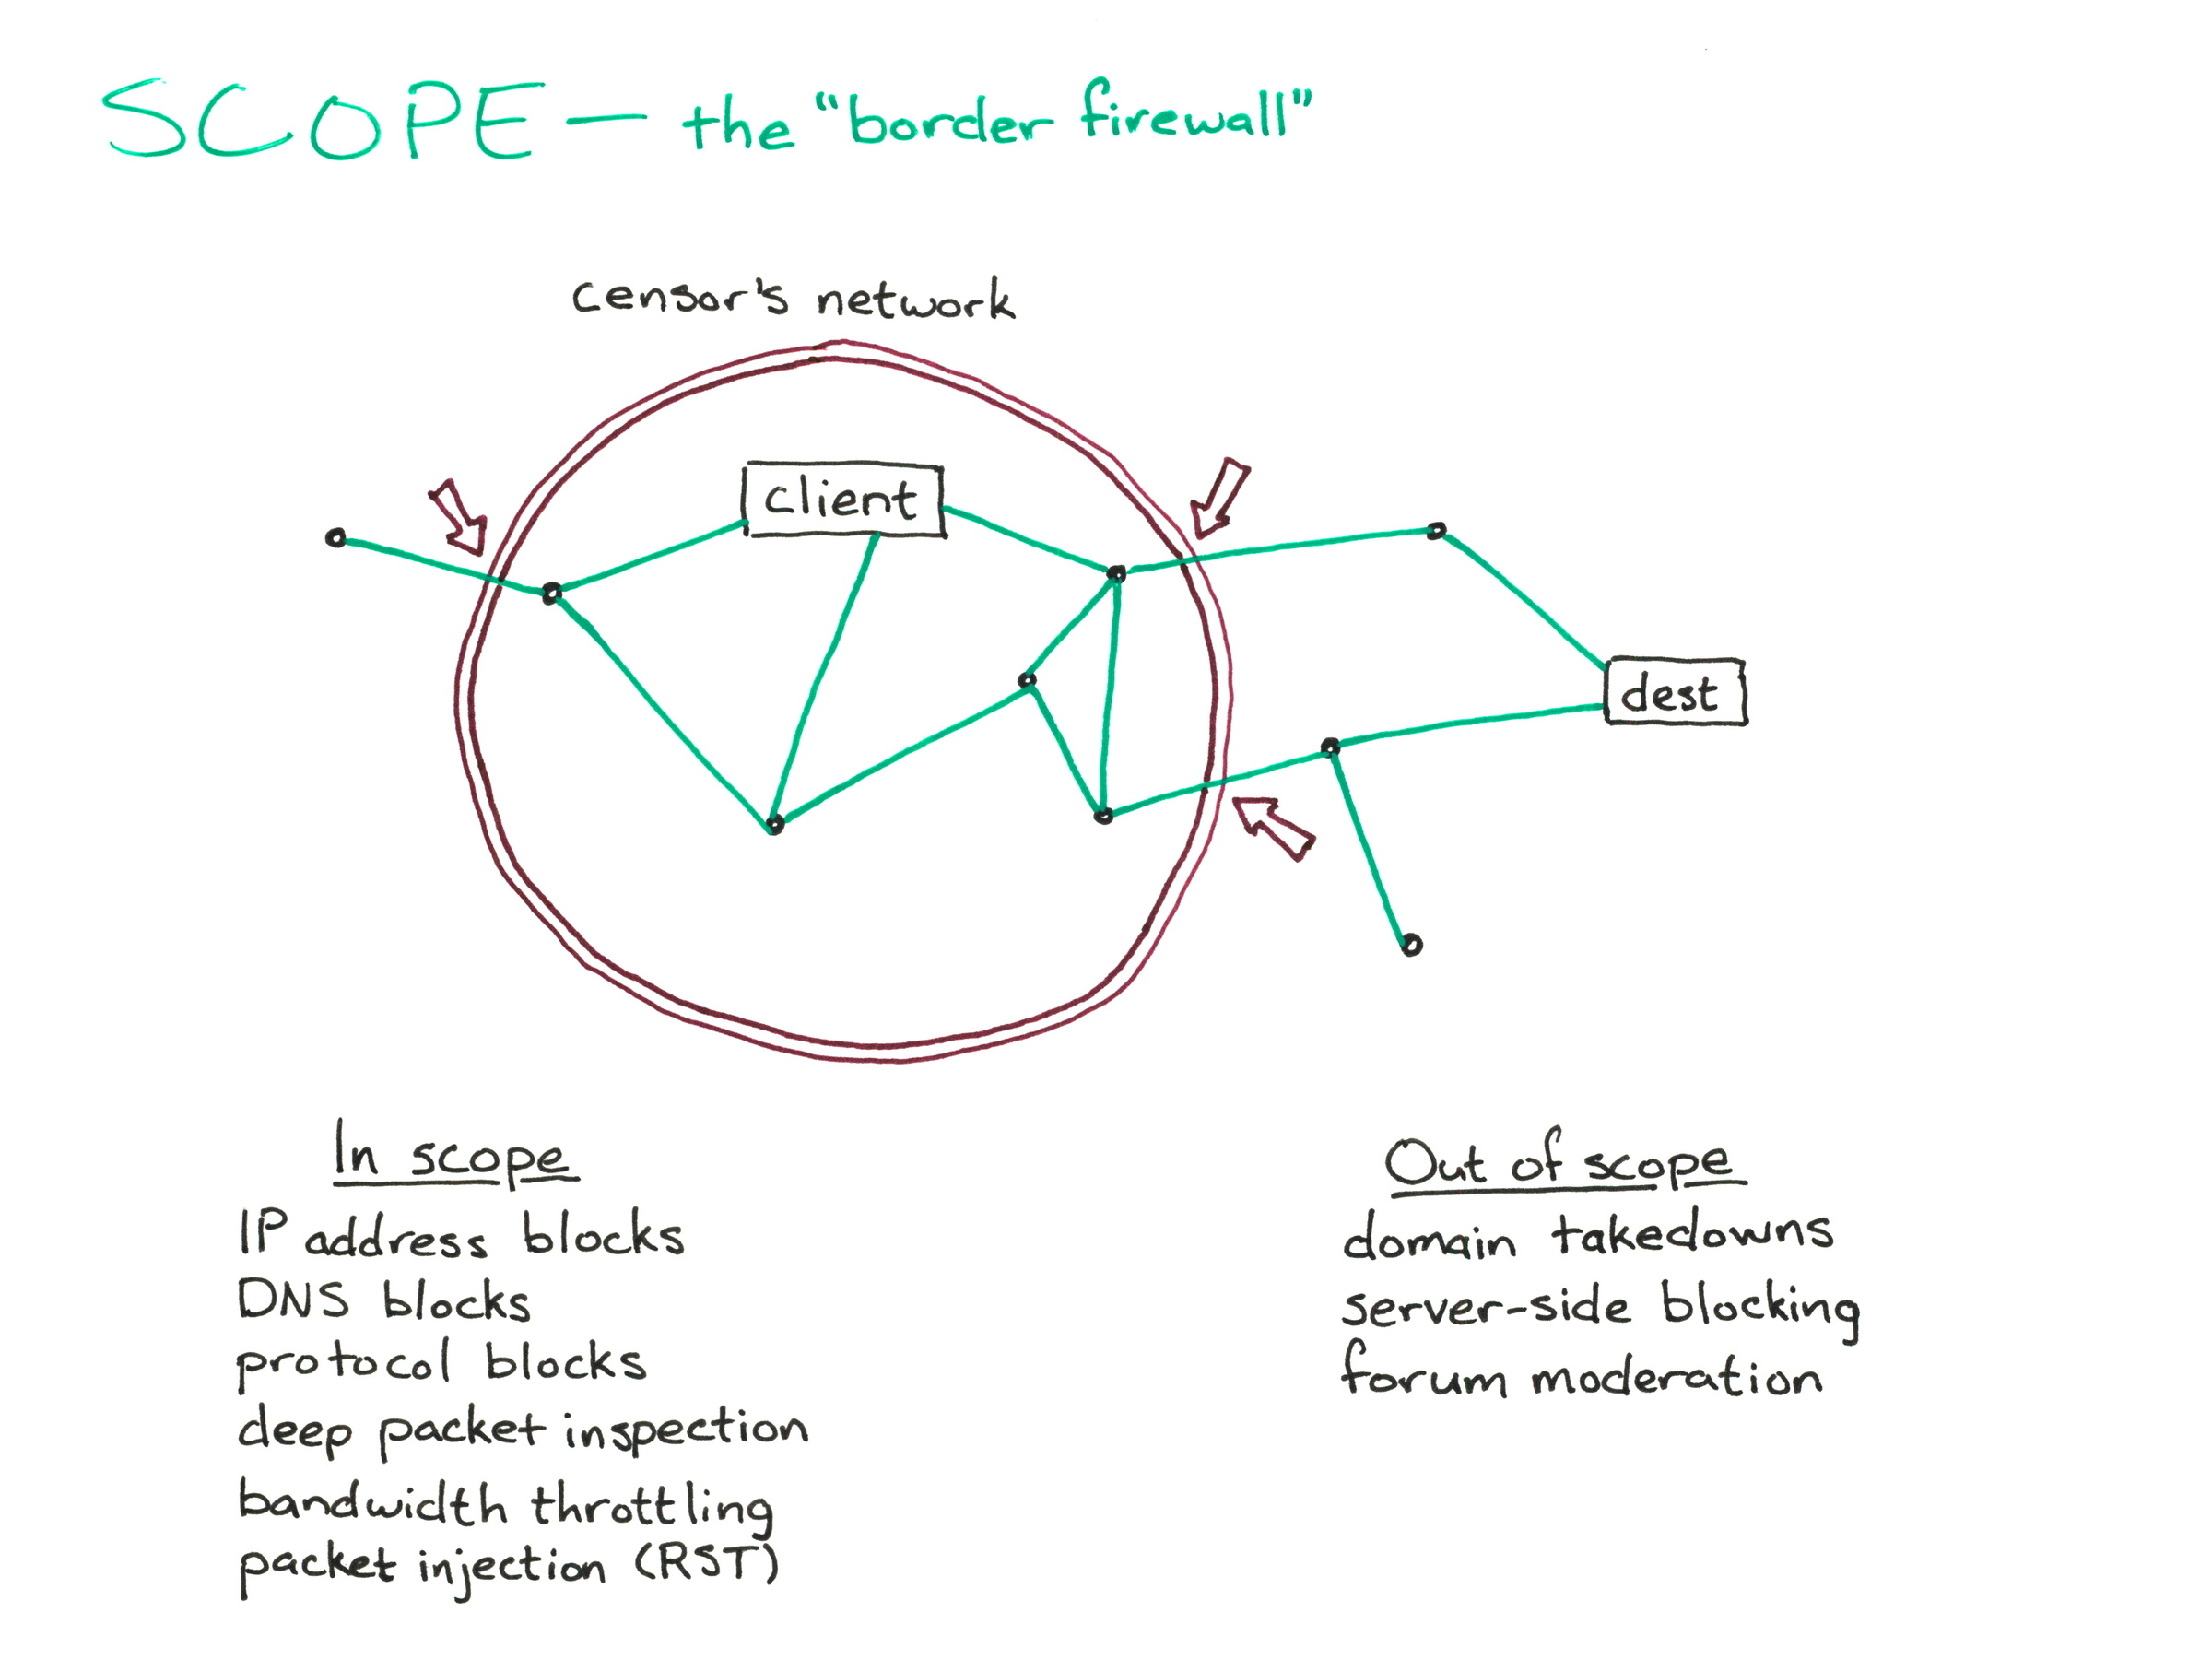 
SCOPE – the “border firewall”

[diagram of border firewall]

In scope:
IP address blocks
DNS blocks
protocol blocks
deep packet inspection
bandwidth throttling
packet injection (RST)

Out of scope:
domain takedowns
server-side blocking
forum moderation
